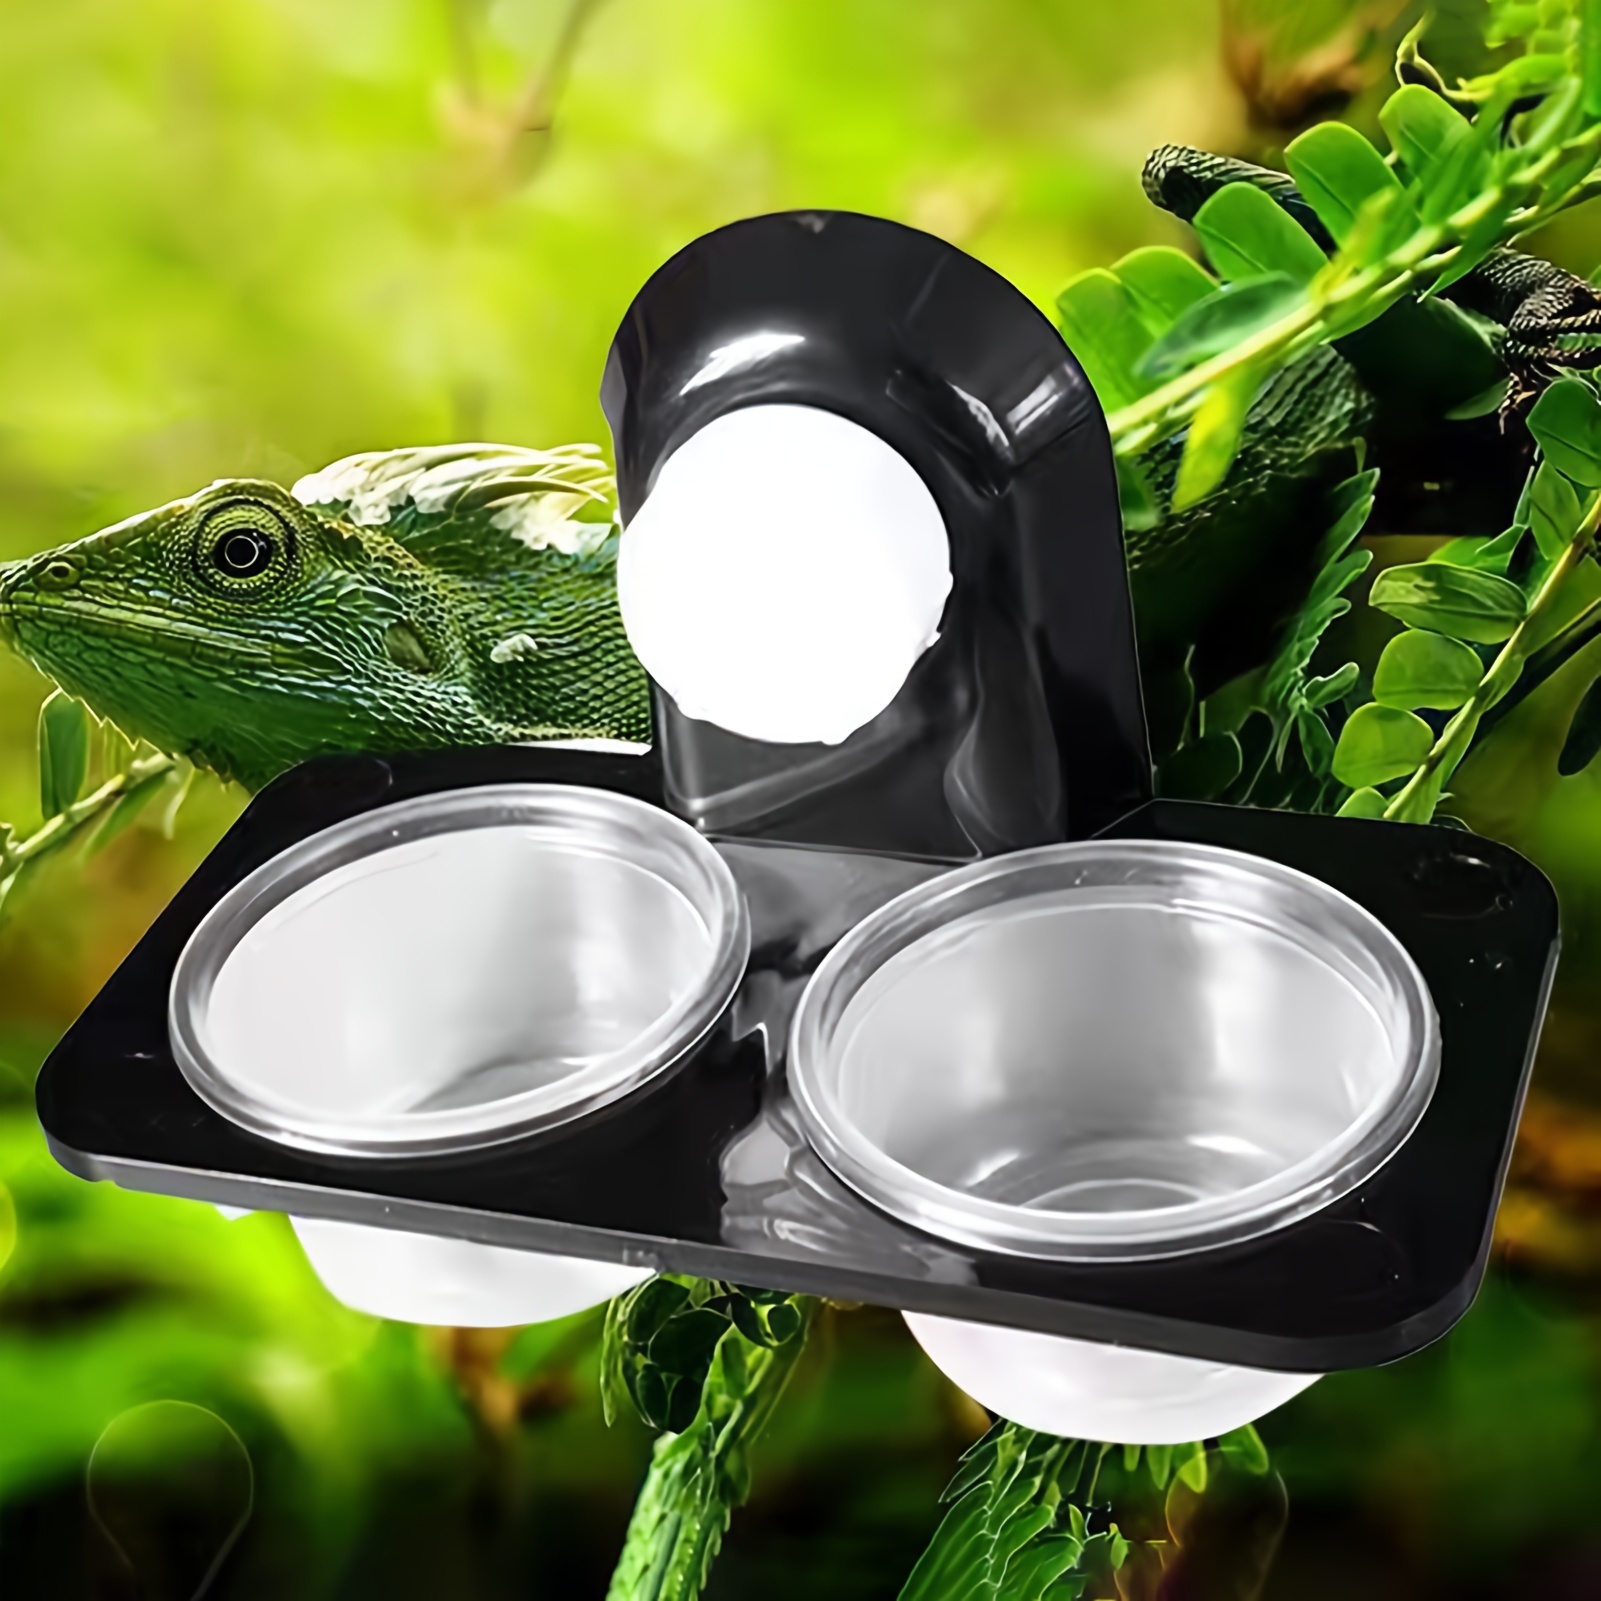 

1pc Black Plastic Gecko Feeder, Ledge Reptile Food Bowl And Water Dish For Feeder Ledge Accessories Supplies